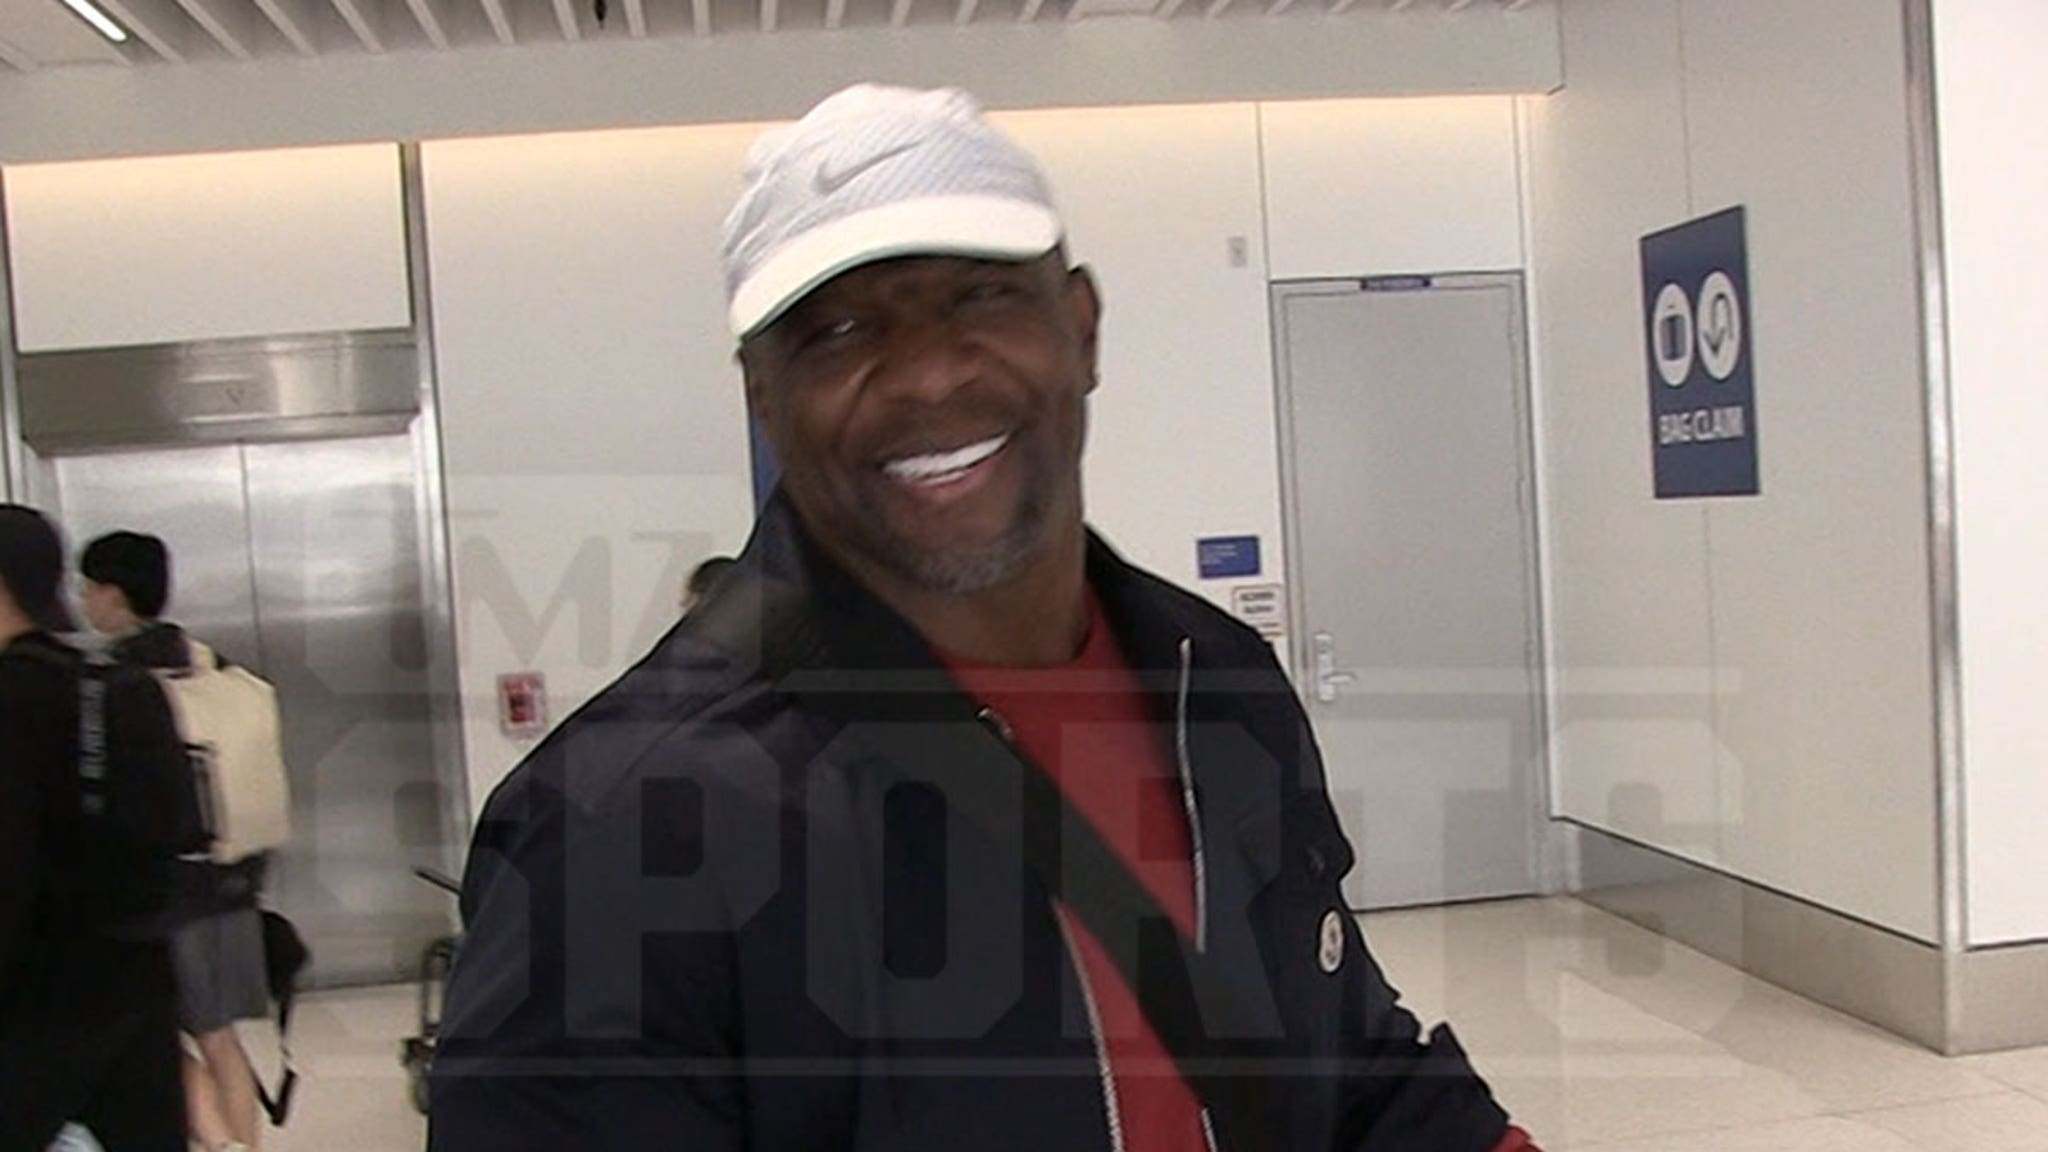 Terry Crews Says He’ll Be At Anderson Silva’s Boxing Match, But Not Fighting Him